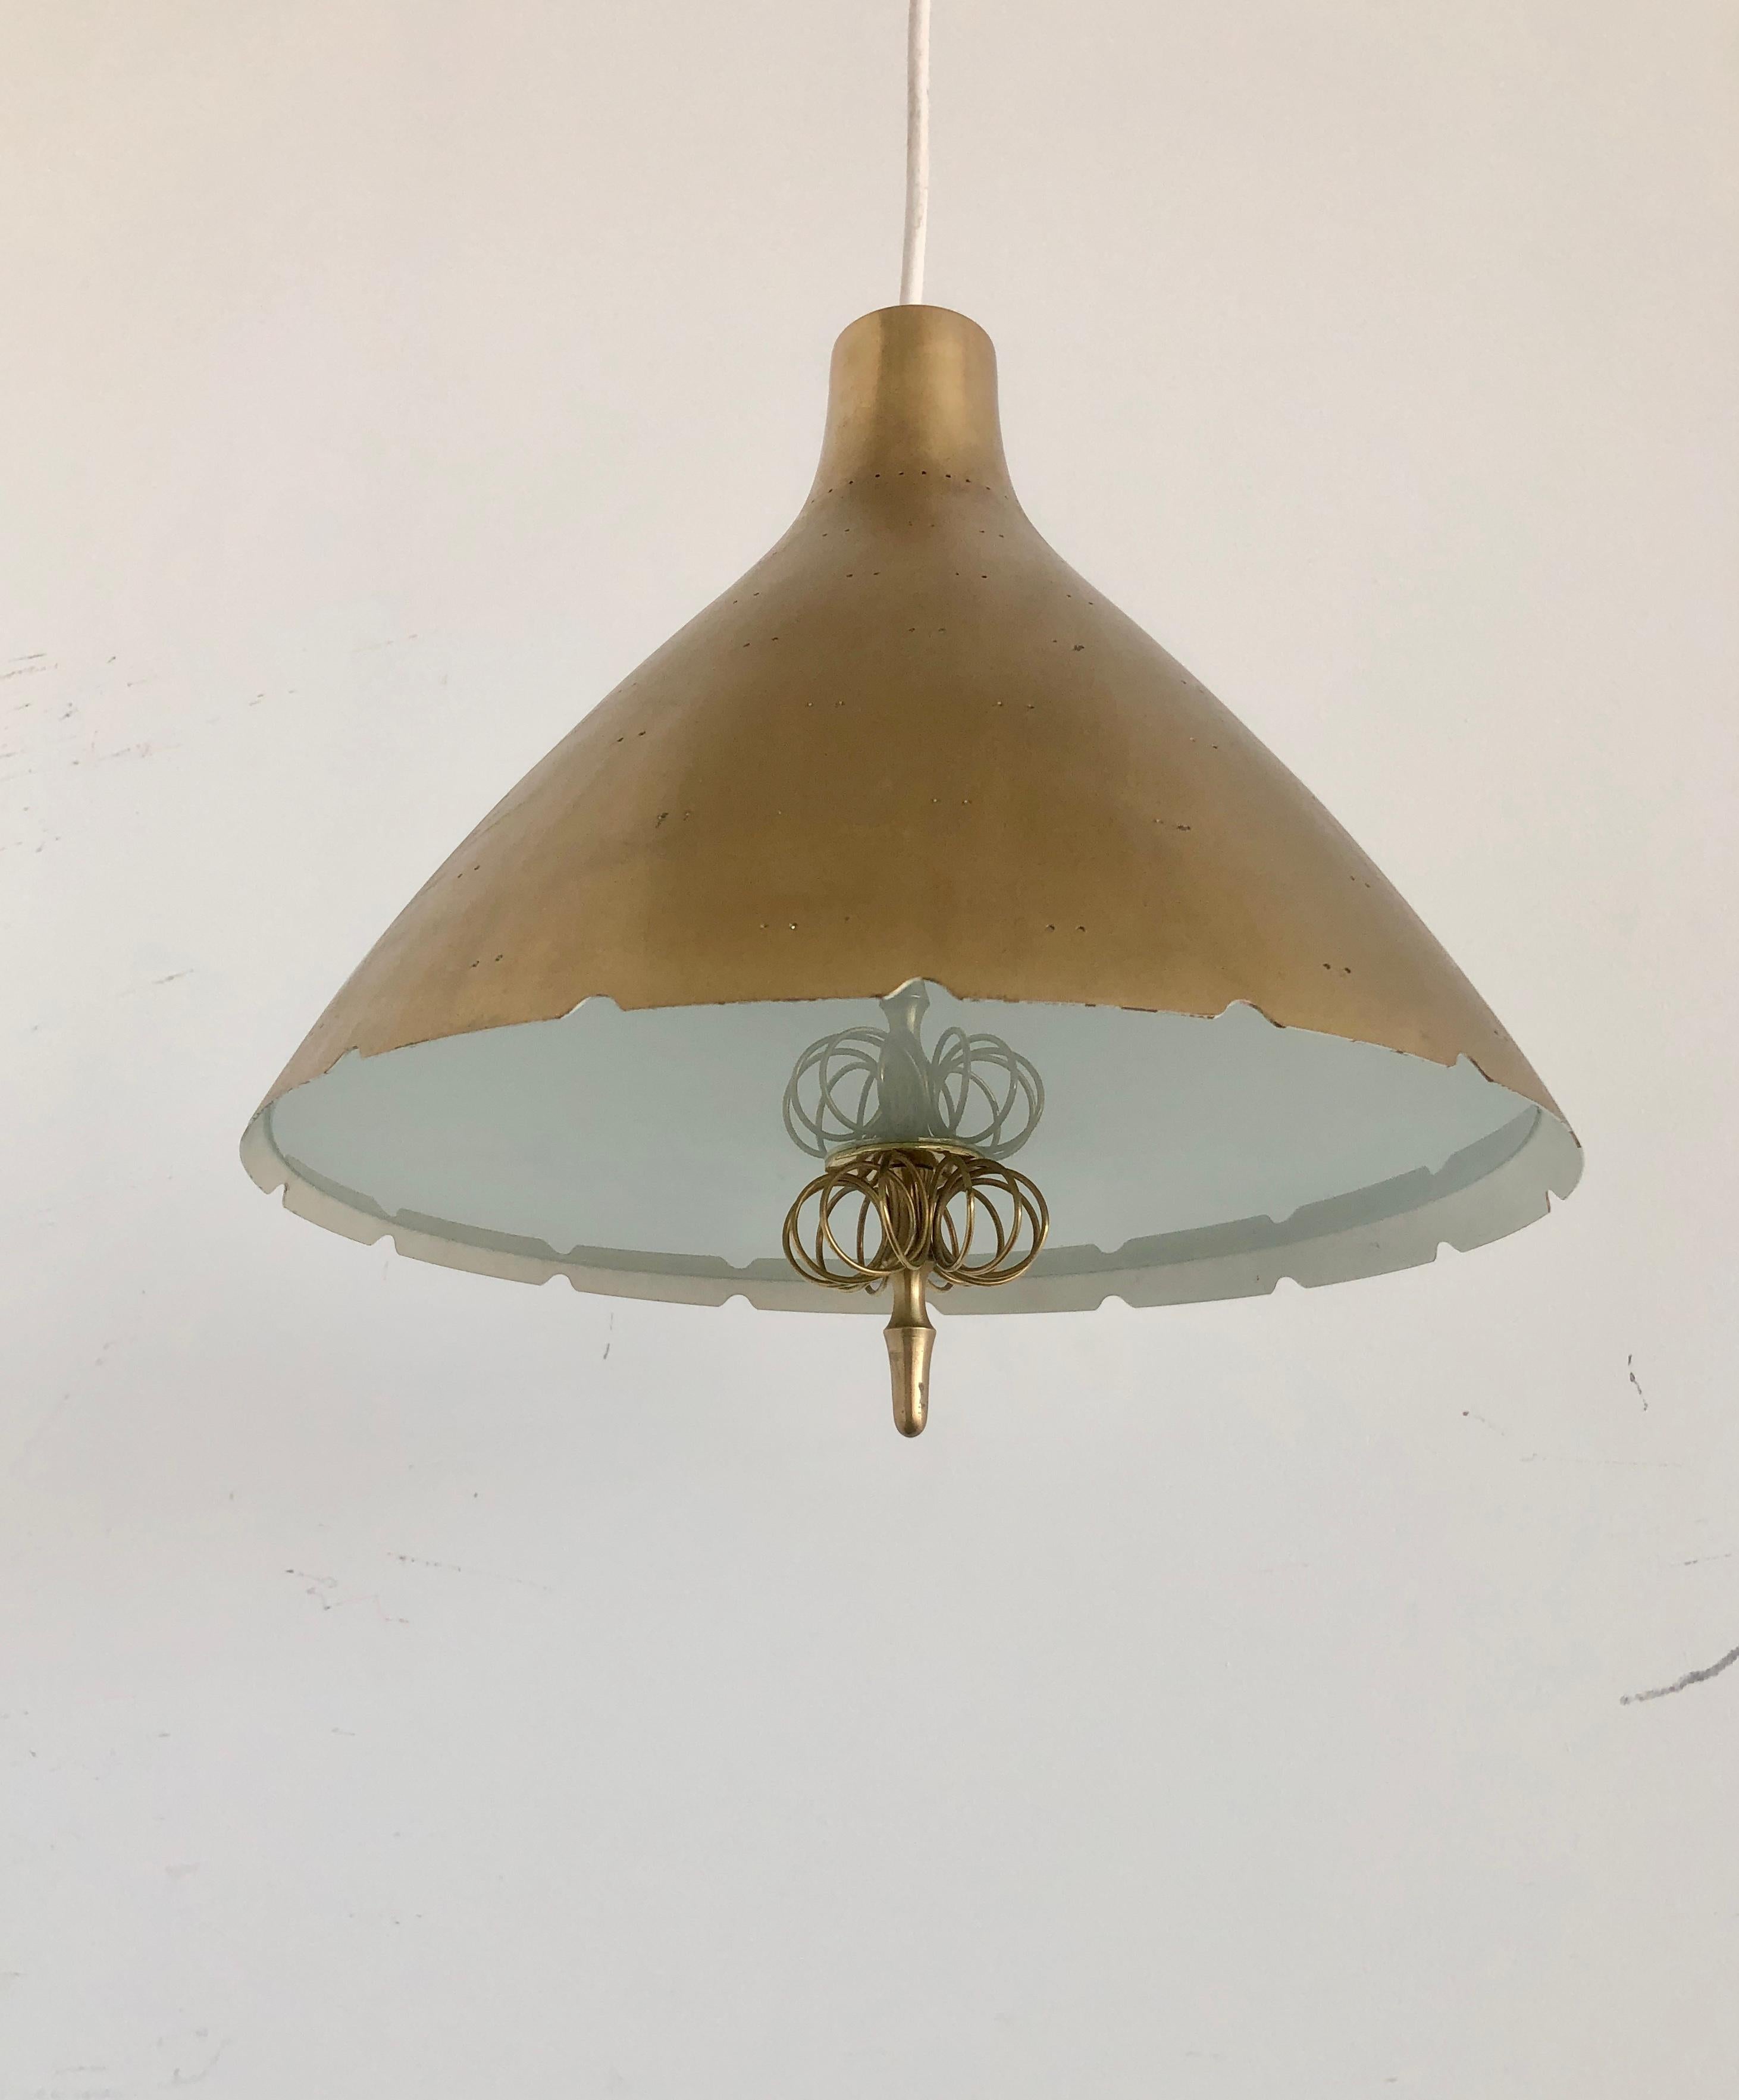 A large lighting pendant Model K2-46 designed by Paavo Tynell for Idman, Finland, Circa 1950th. The perforated brass shade, a etched glass diffuser underneath with wire brass decor. The overall drop can be adjusted. Natural patina on brass. Rewiring